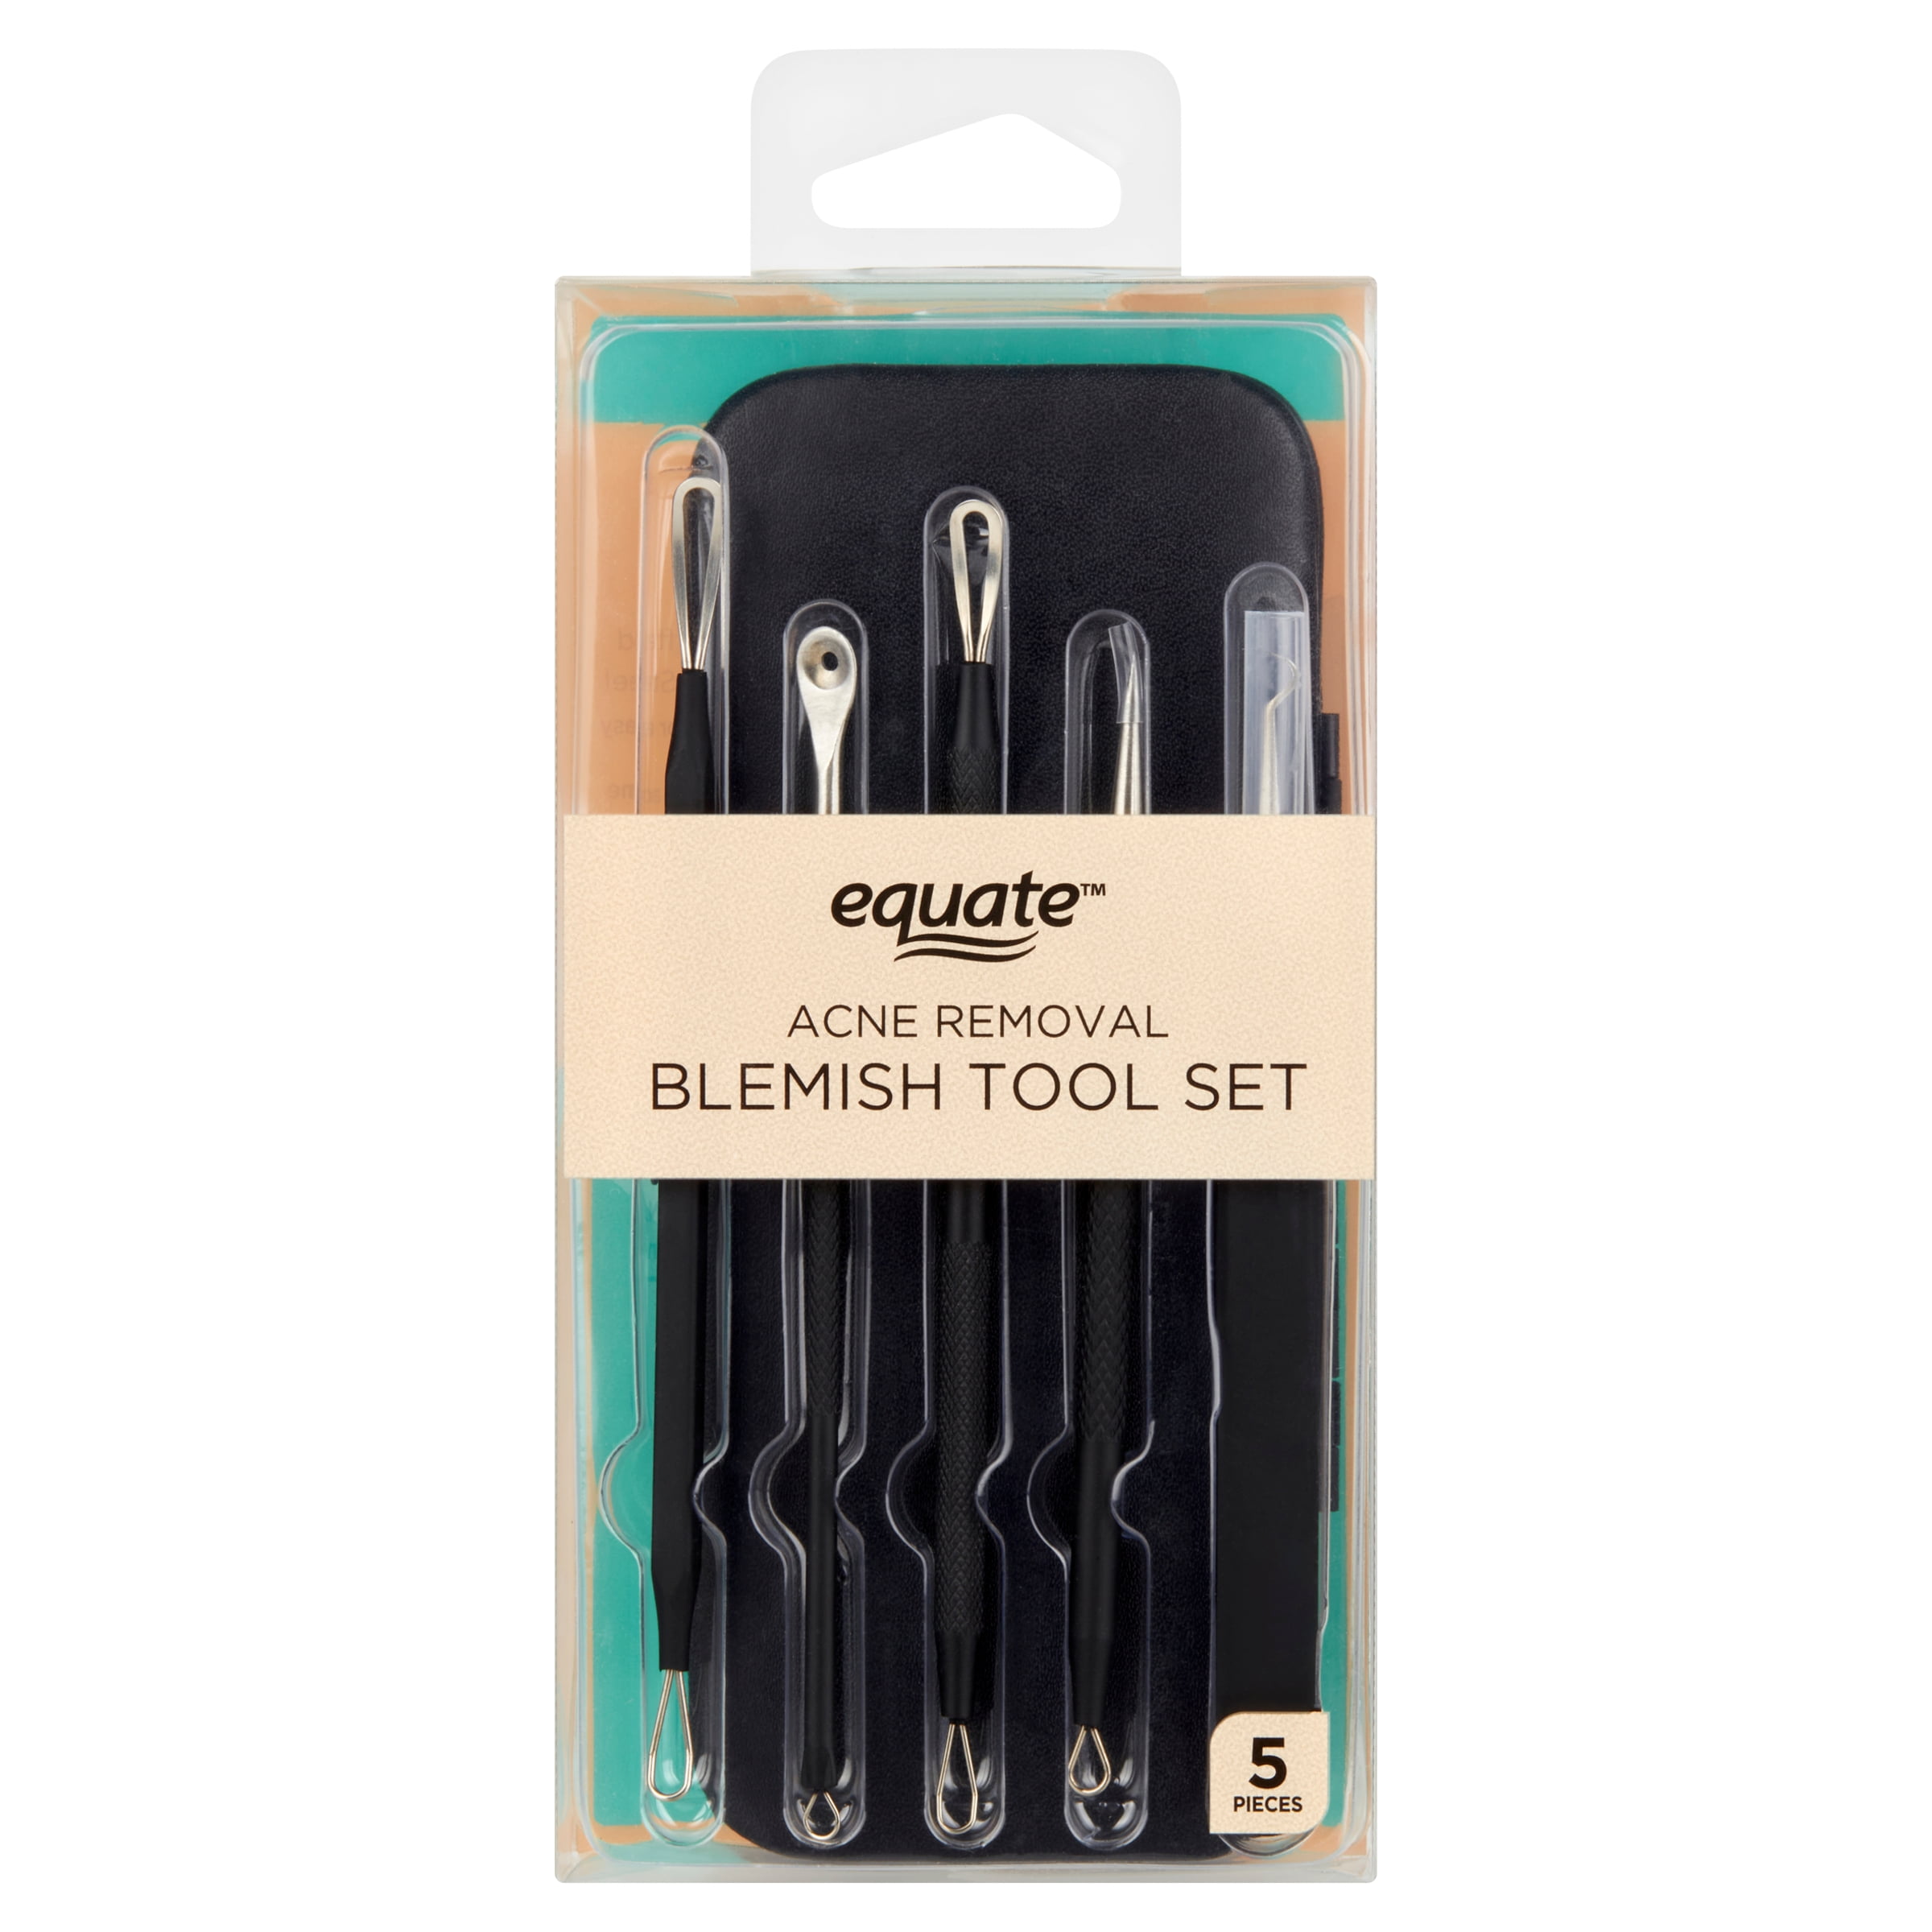 Equate Beauty Acne Removal Blemish Tool Set, 5 Count